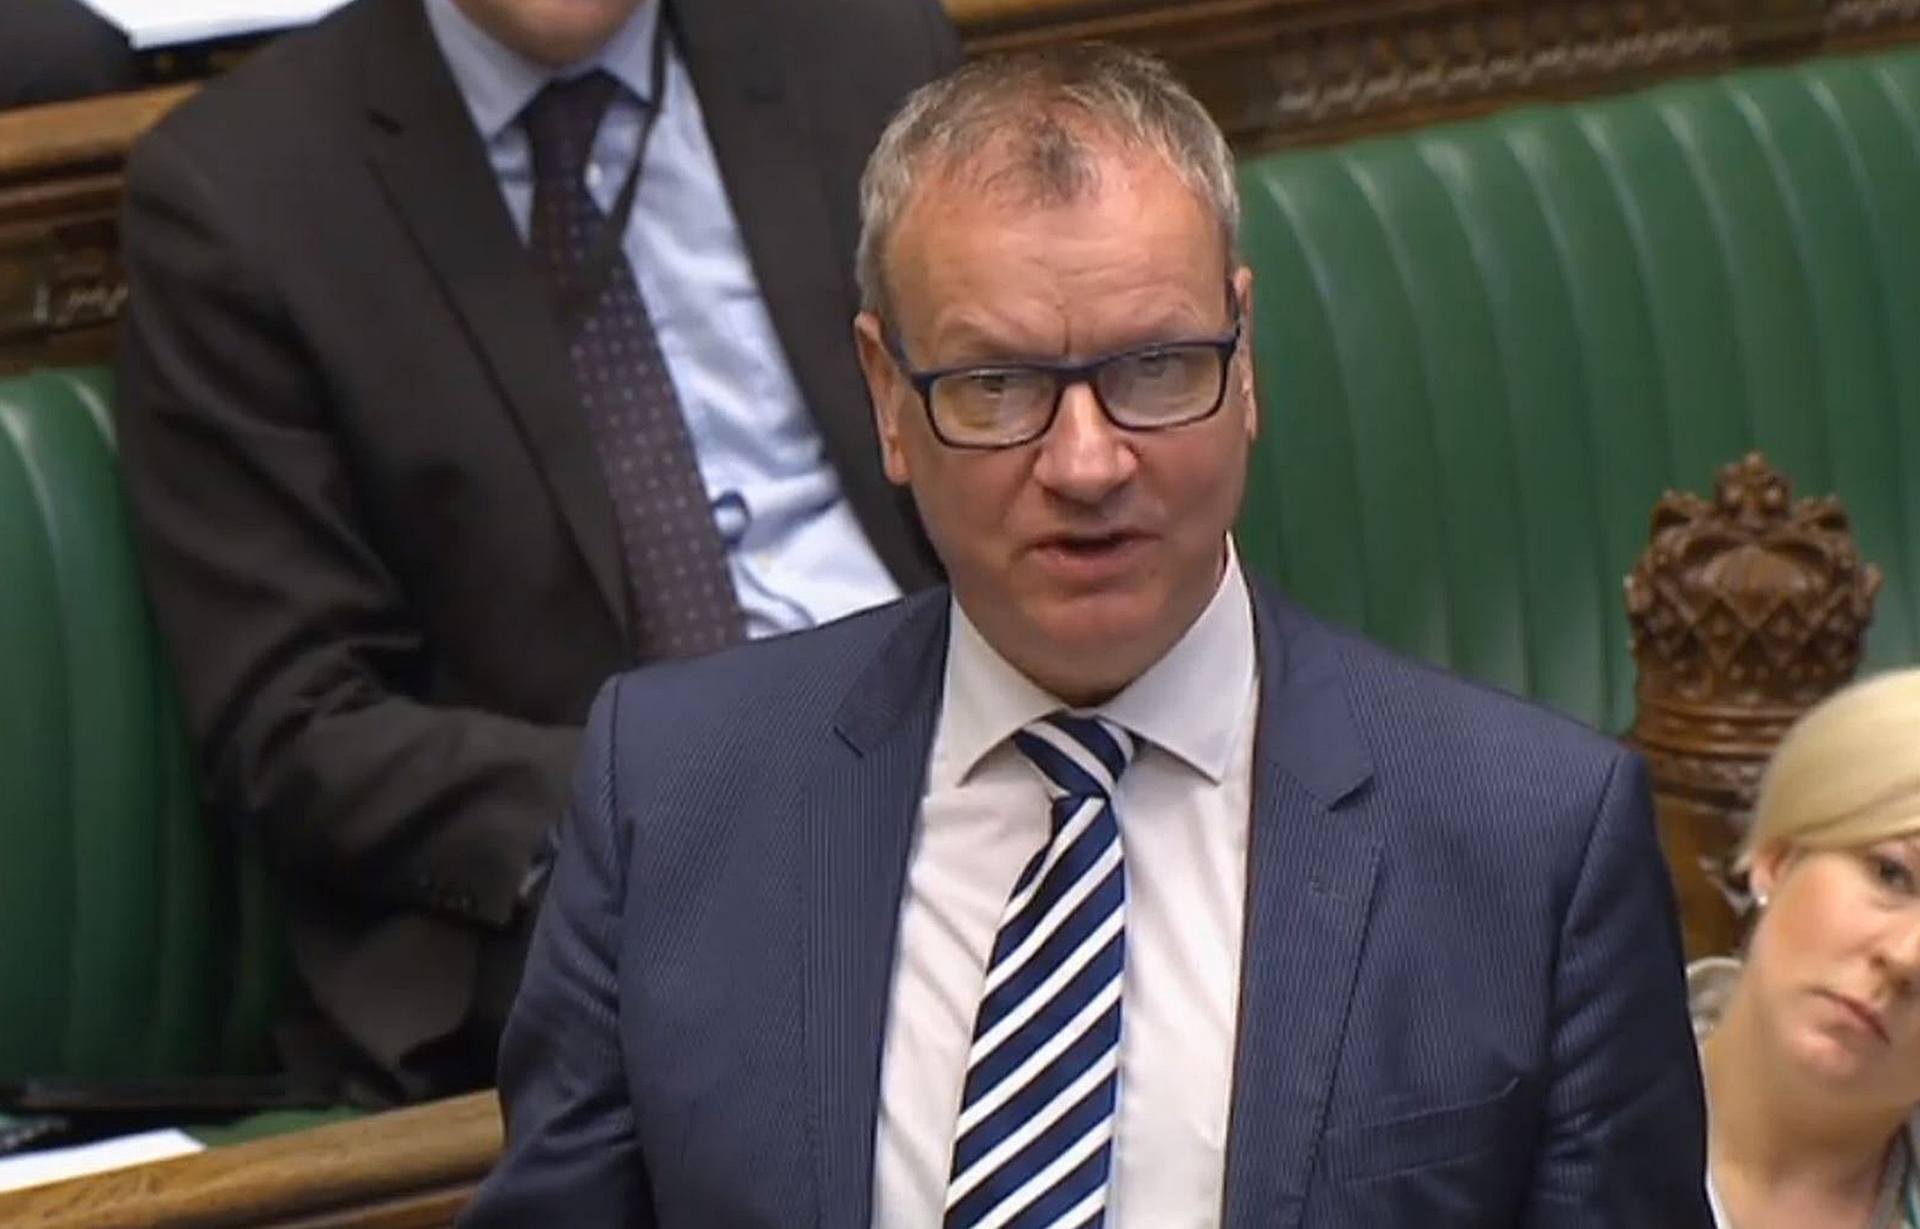 Veteran SNP MP Pete Wishart said the strategy should focus on votes won, not seats.